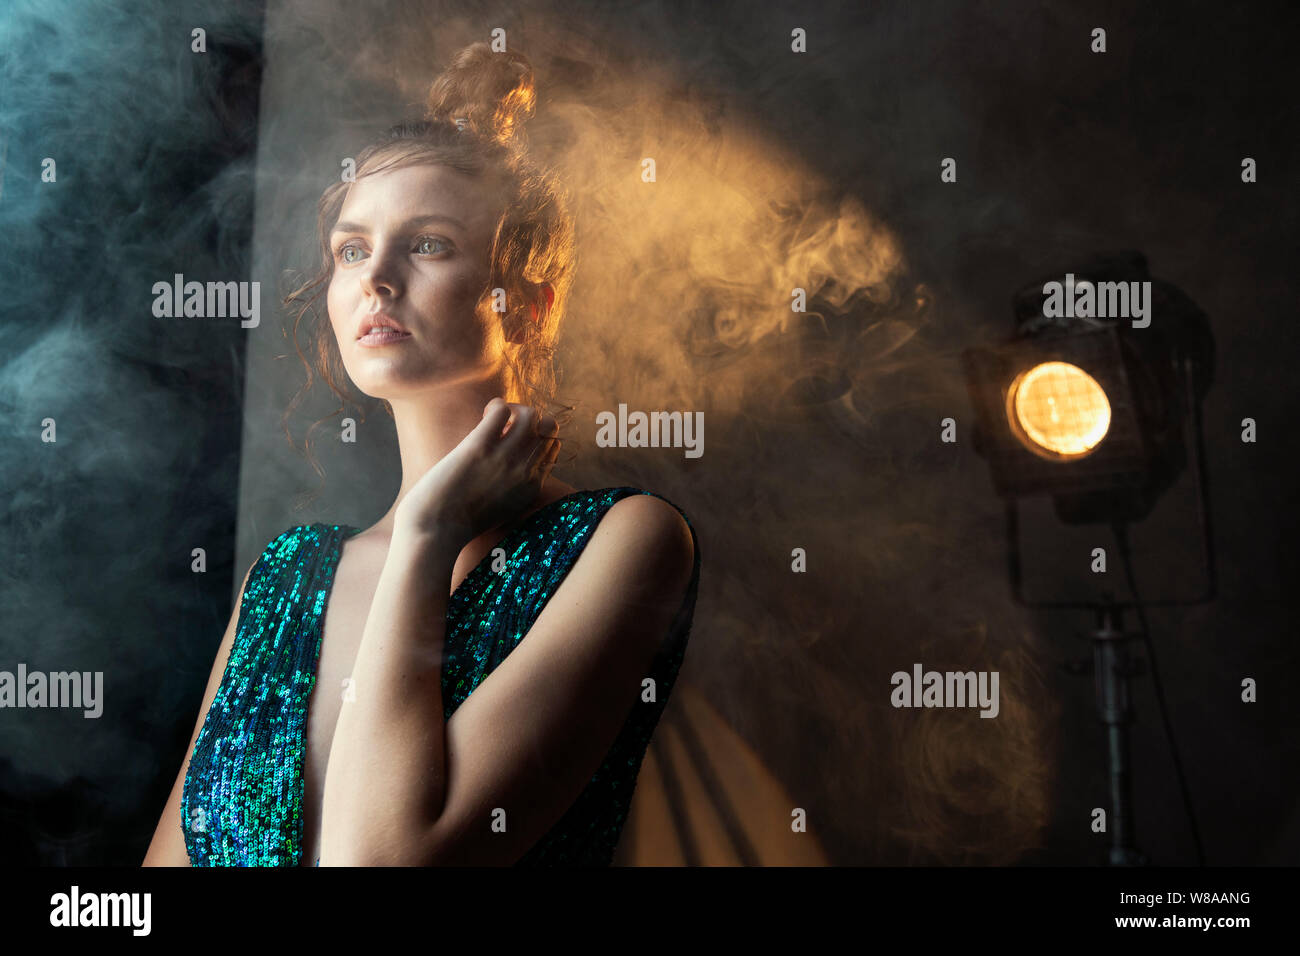 Charning woman in spotlight beam and smoke looking into the distance Stock Photo